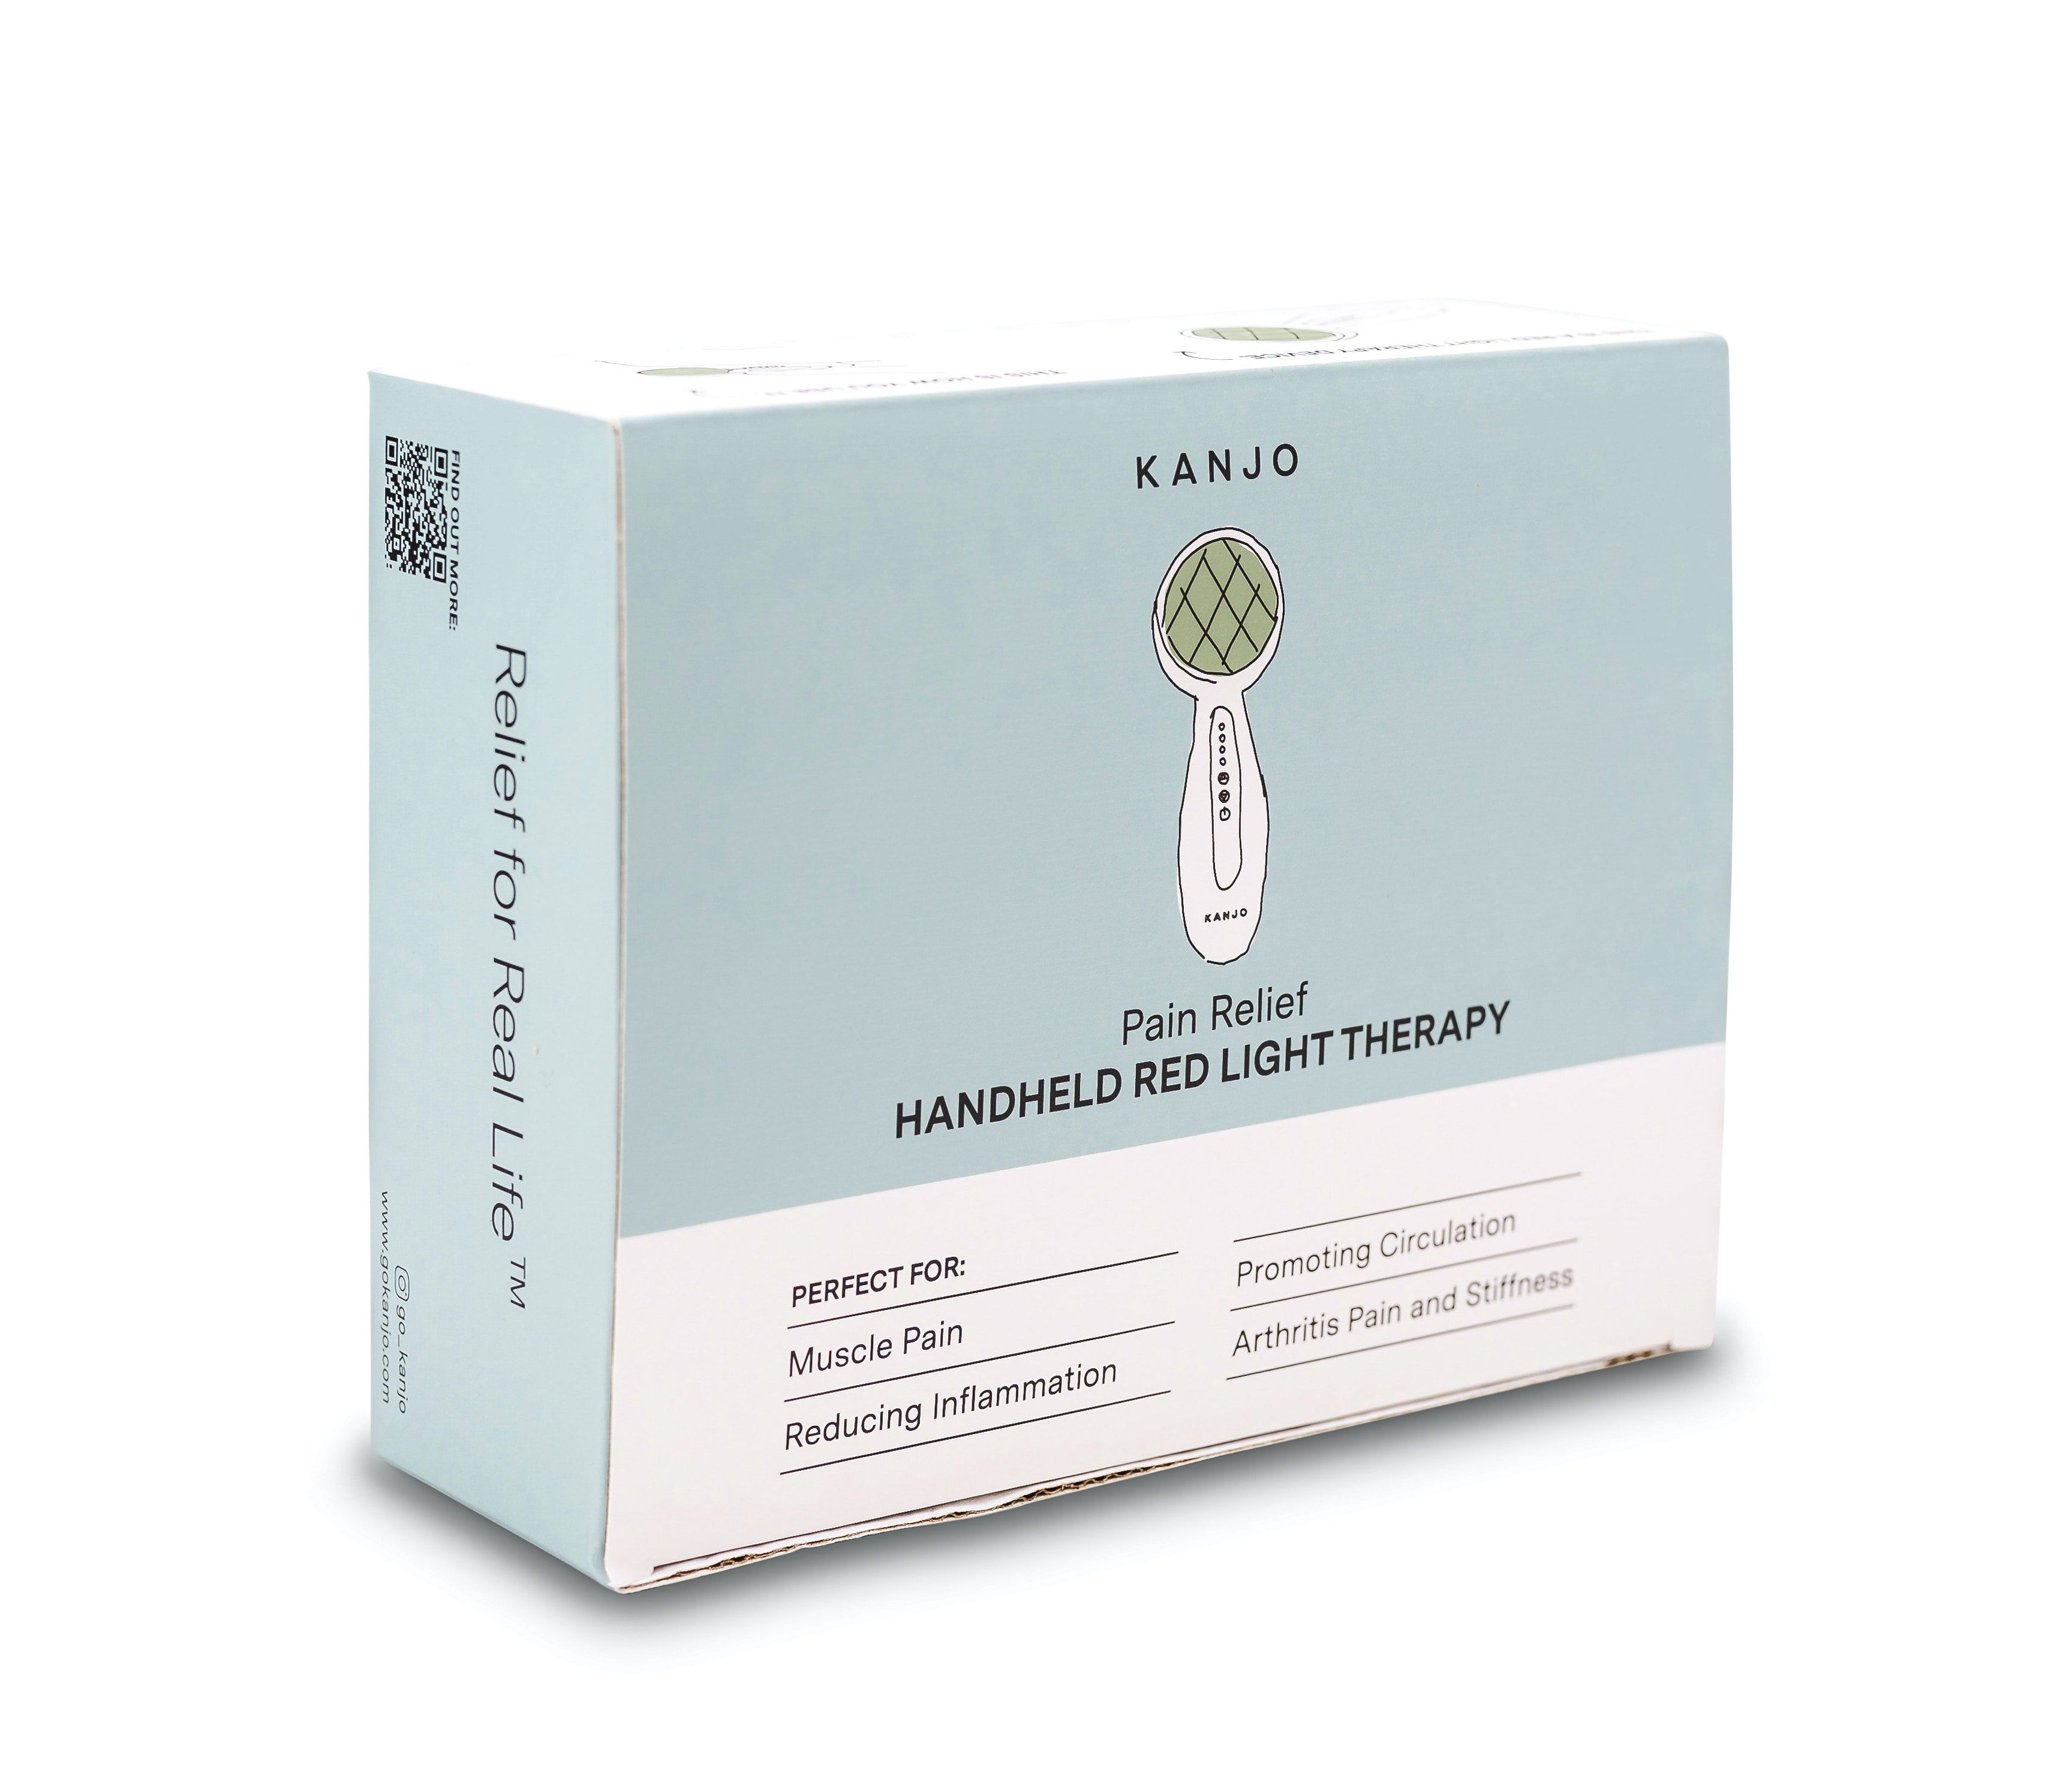 Kanjo Handheld Red Light Therapy Pain Relief Device